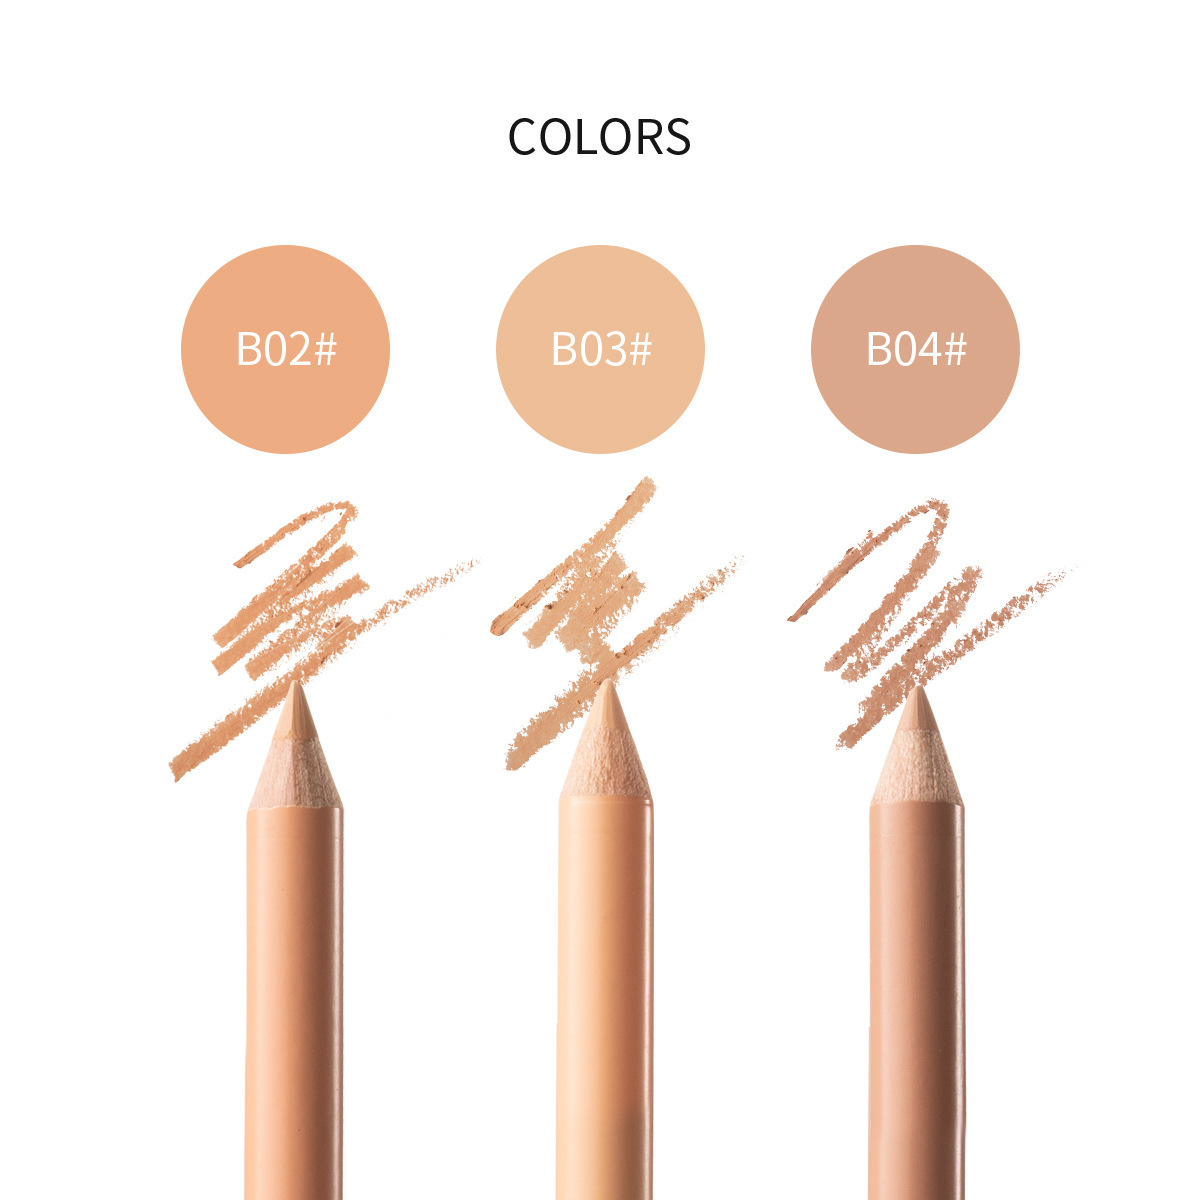 Cross-Border Hot Selling Miele Menow Concealer Cover Spot Lead I Pen Skin Color Concealer AliExpress 3 Colors Available